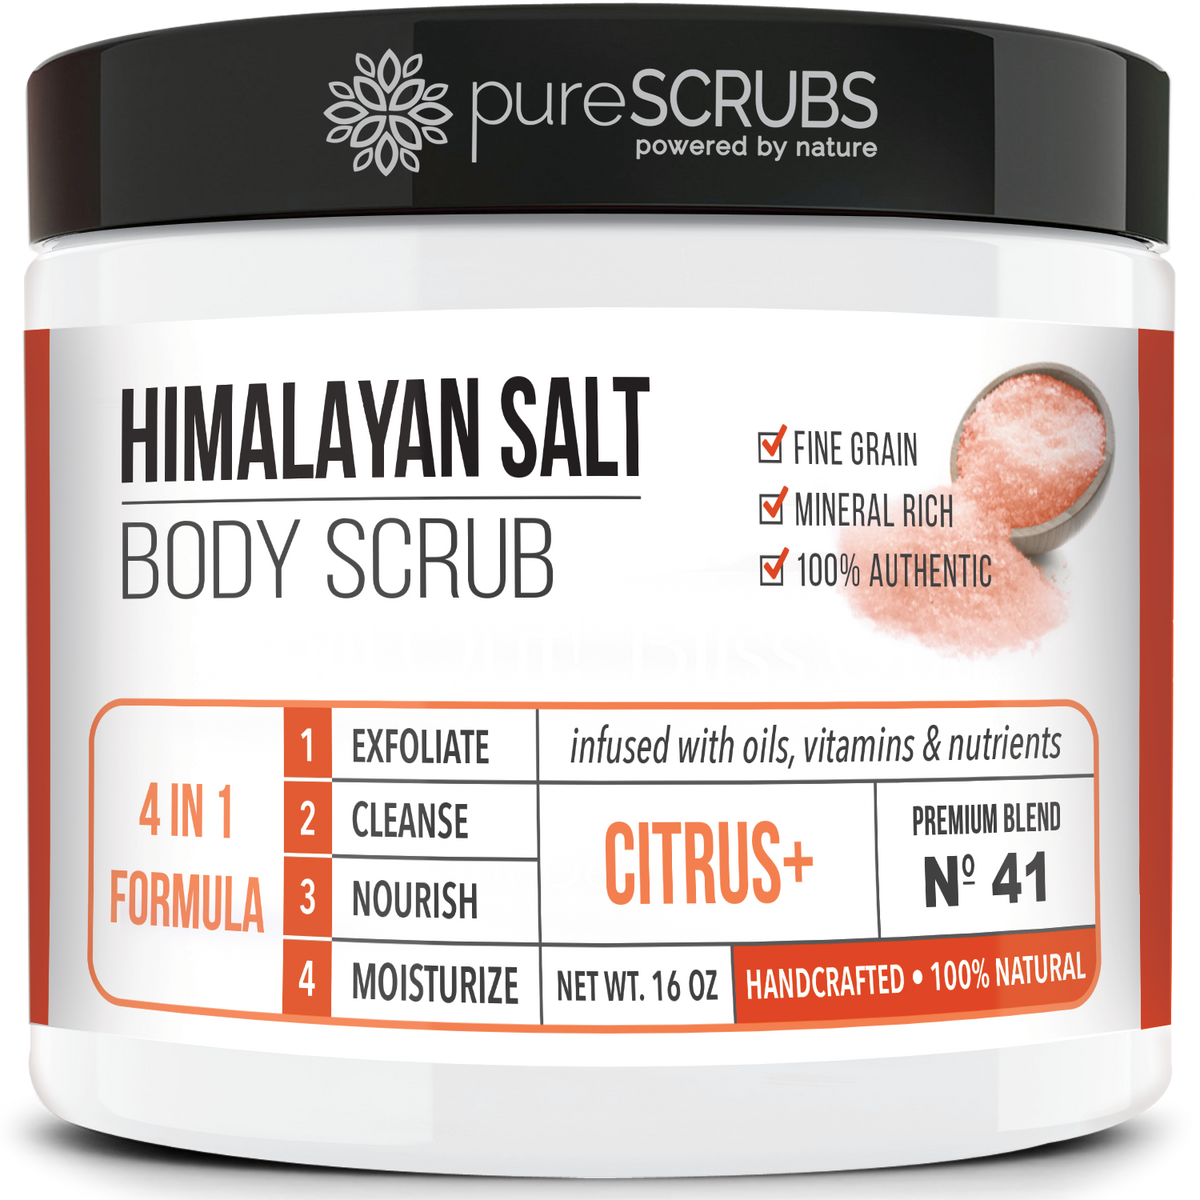 purescrubs 16oz jar citrus pink himalayan salt body scrub Premium Blend #41 to exfoliate your skin comes with free loofah pad free exfoliating organic oatmeal bar soap shea butter and honey and free eco-friendly bamboo spoon to stir and scoop out the scrub 